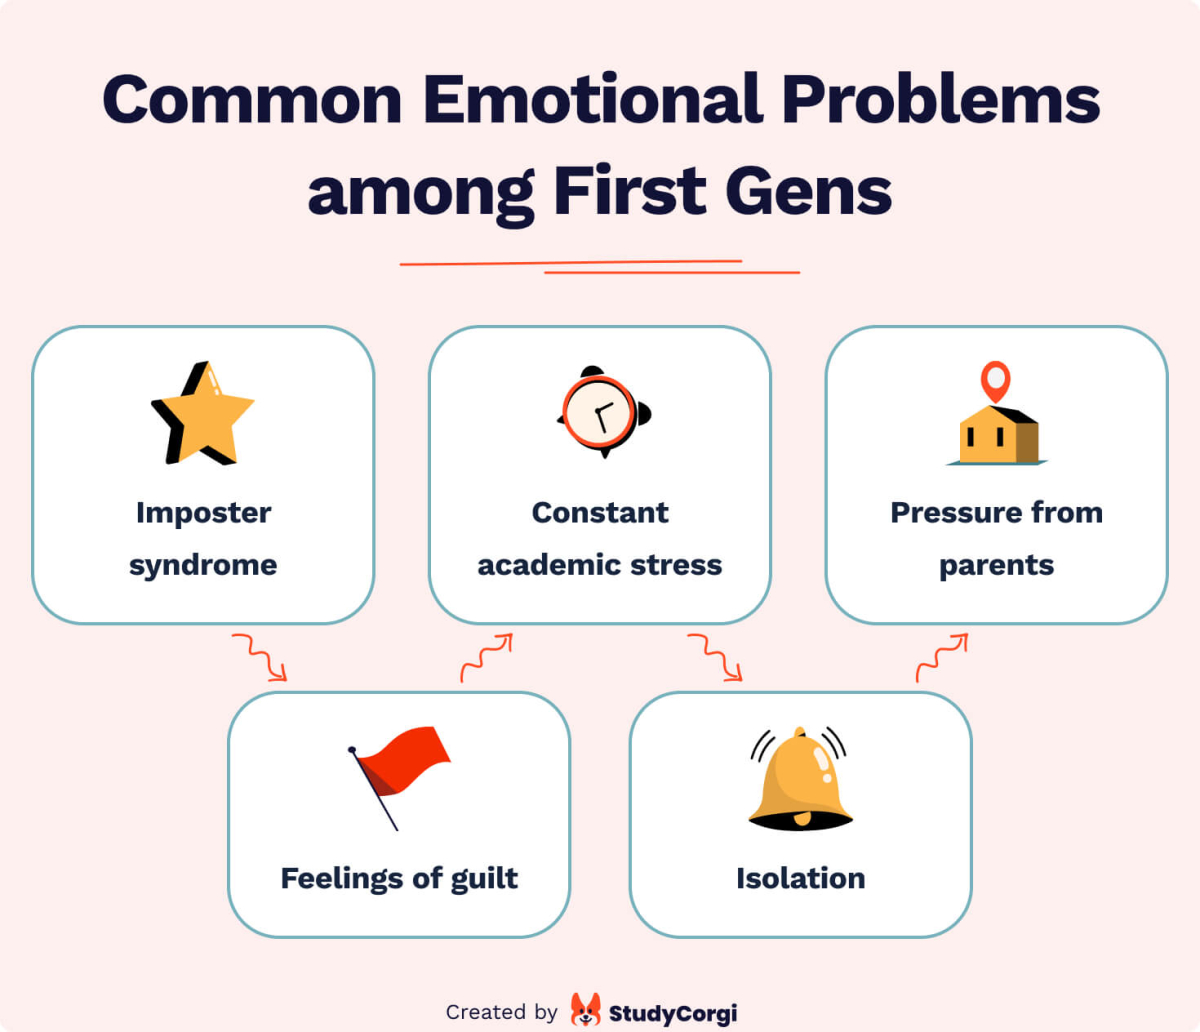 The picture enumerates common emotional problems among first-generation students. 